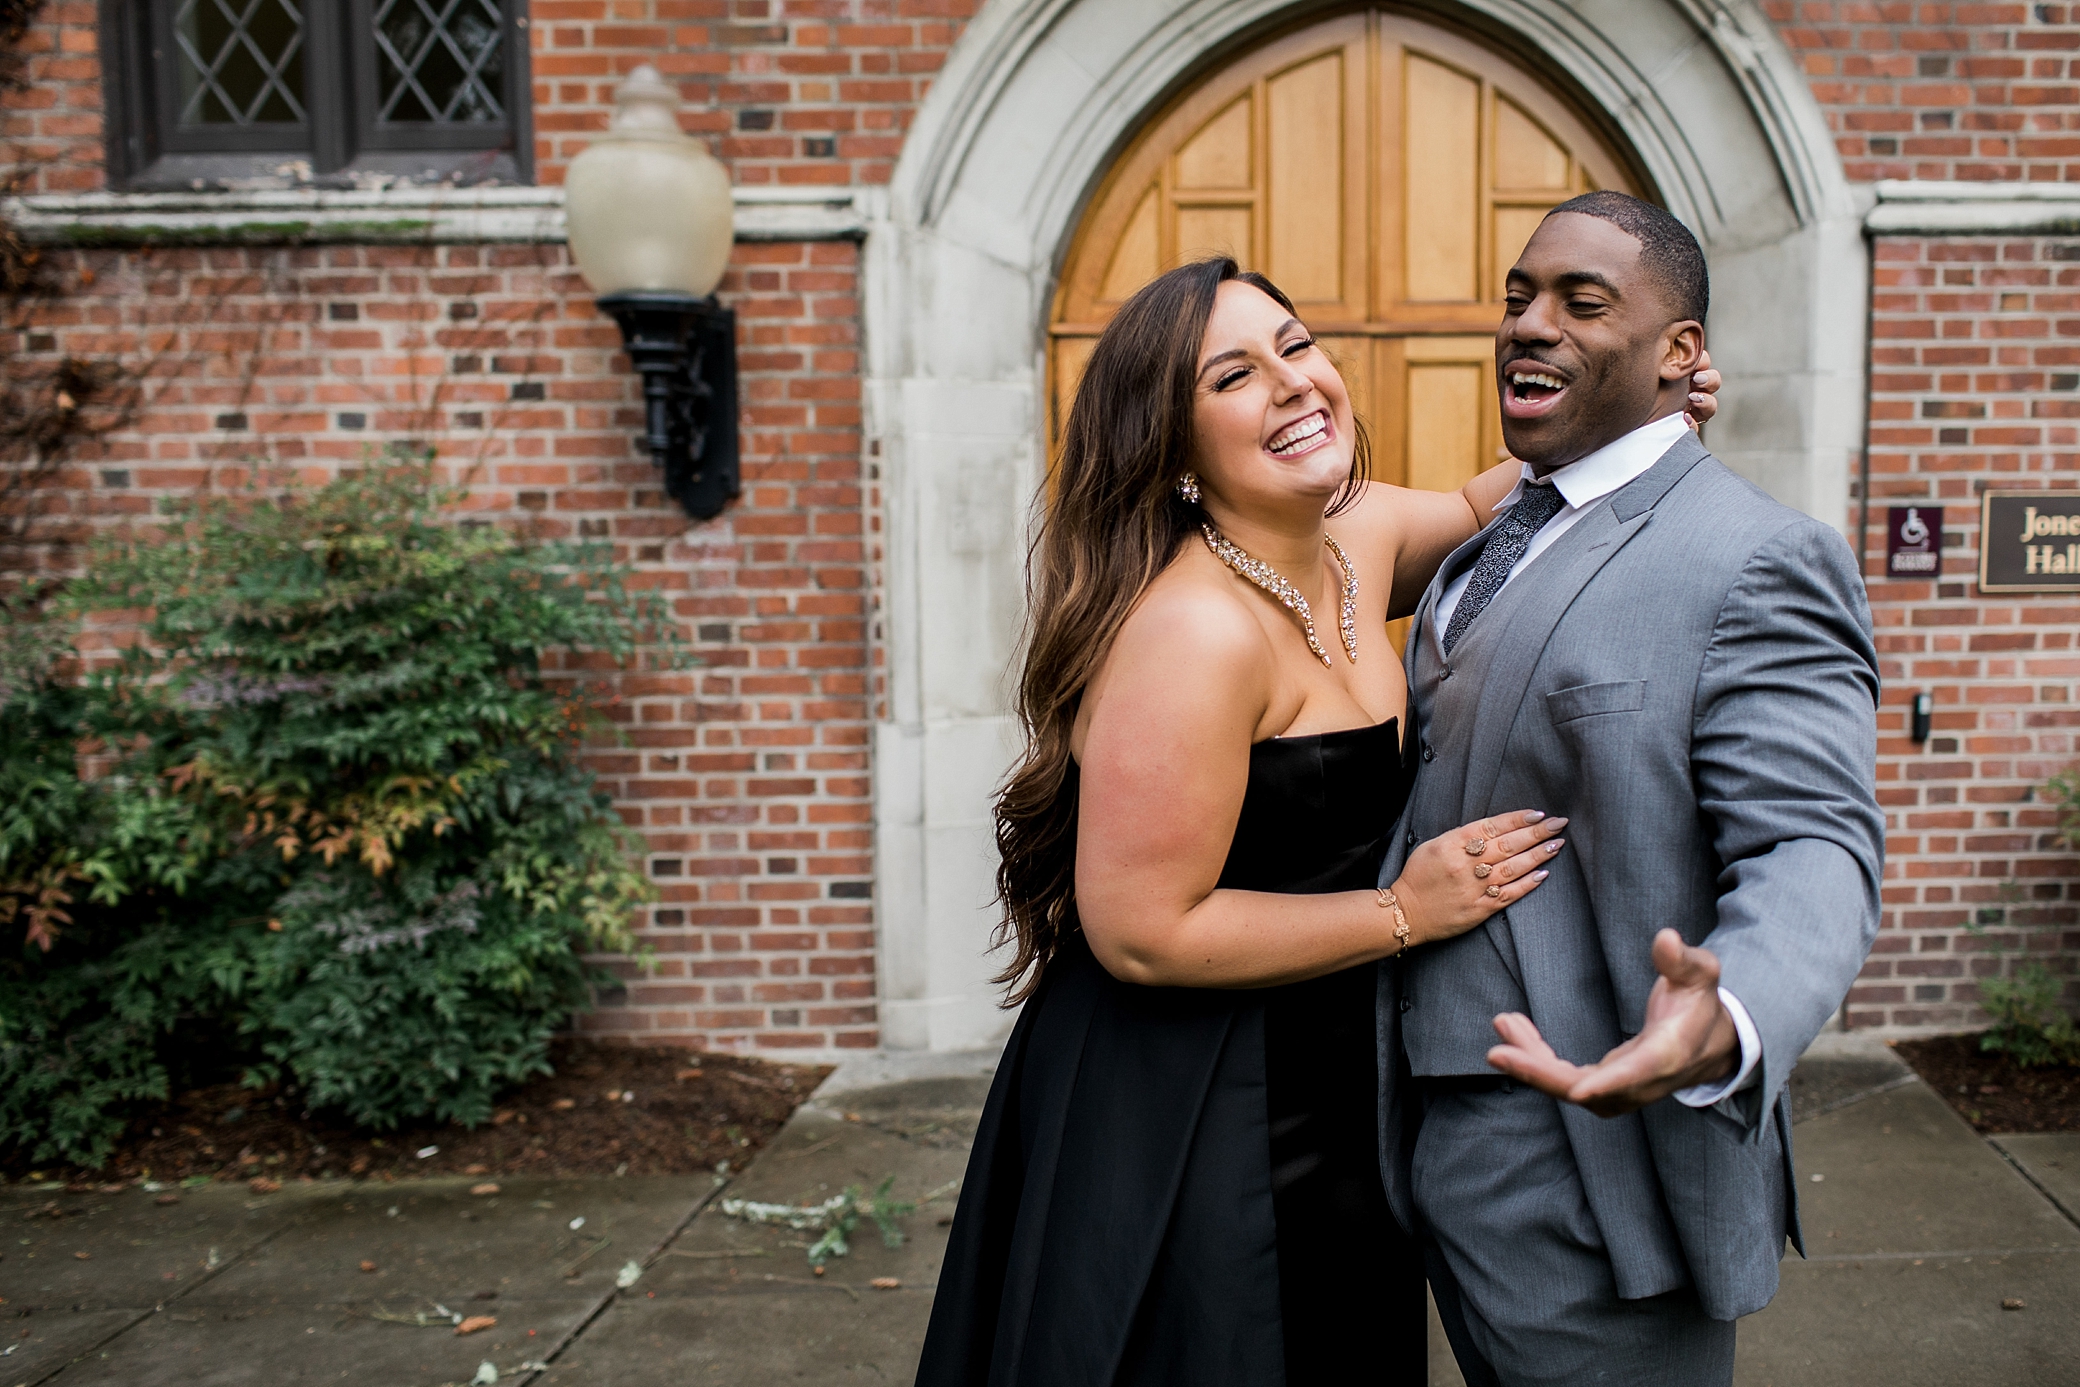 Couple laughing during Engagement session | Megan Montalvo Photography